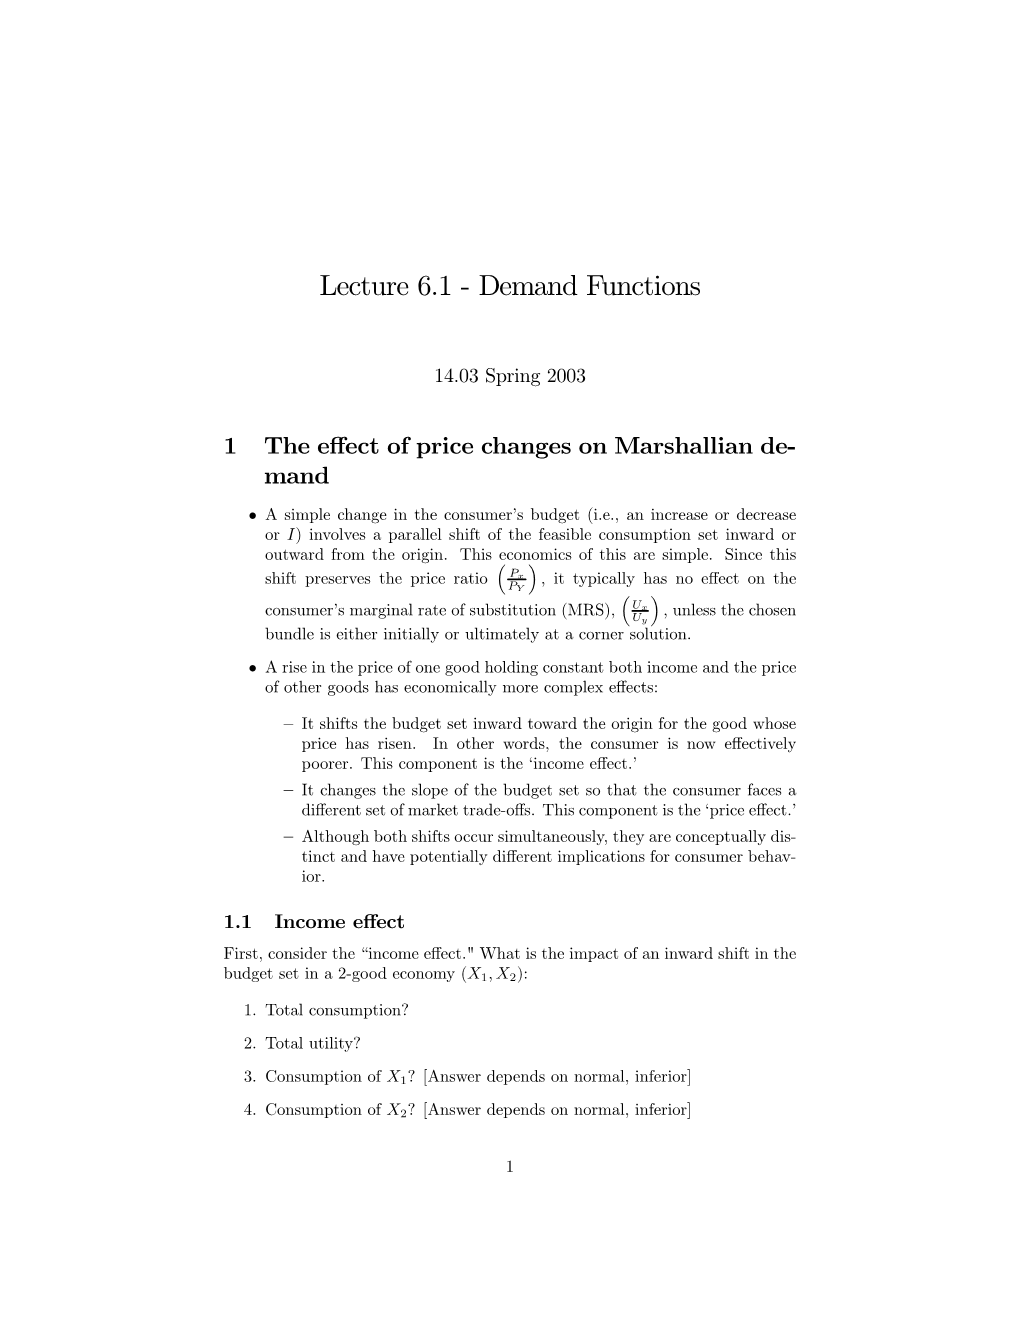 Lecture 6.1 - Demand Functions